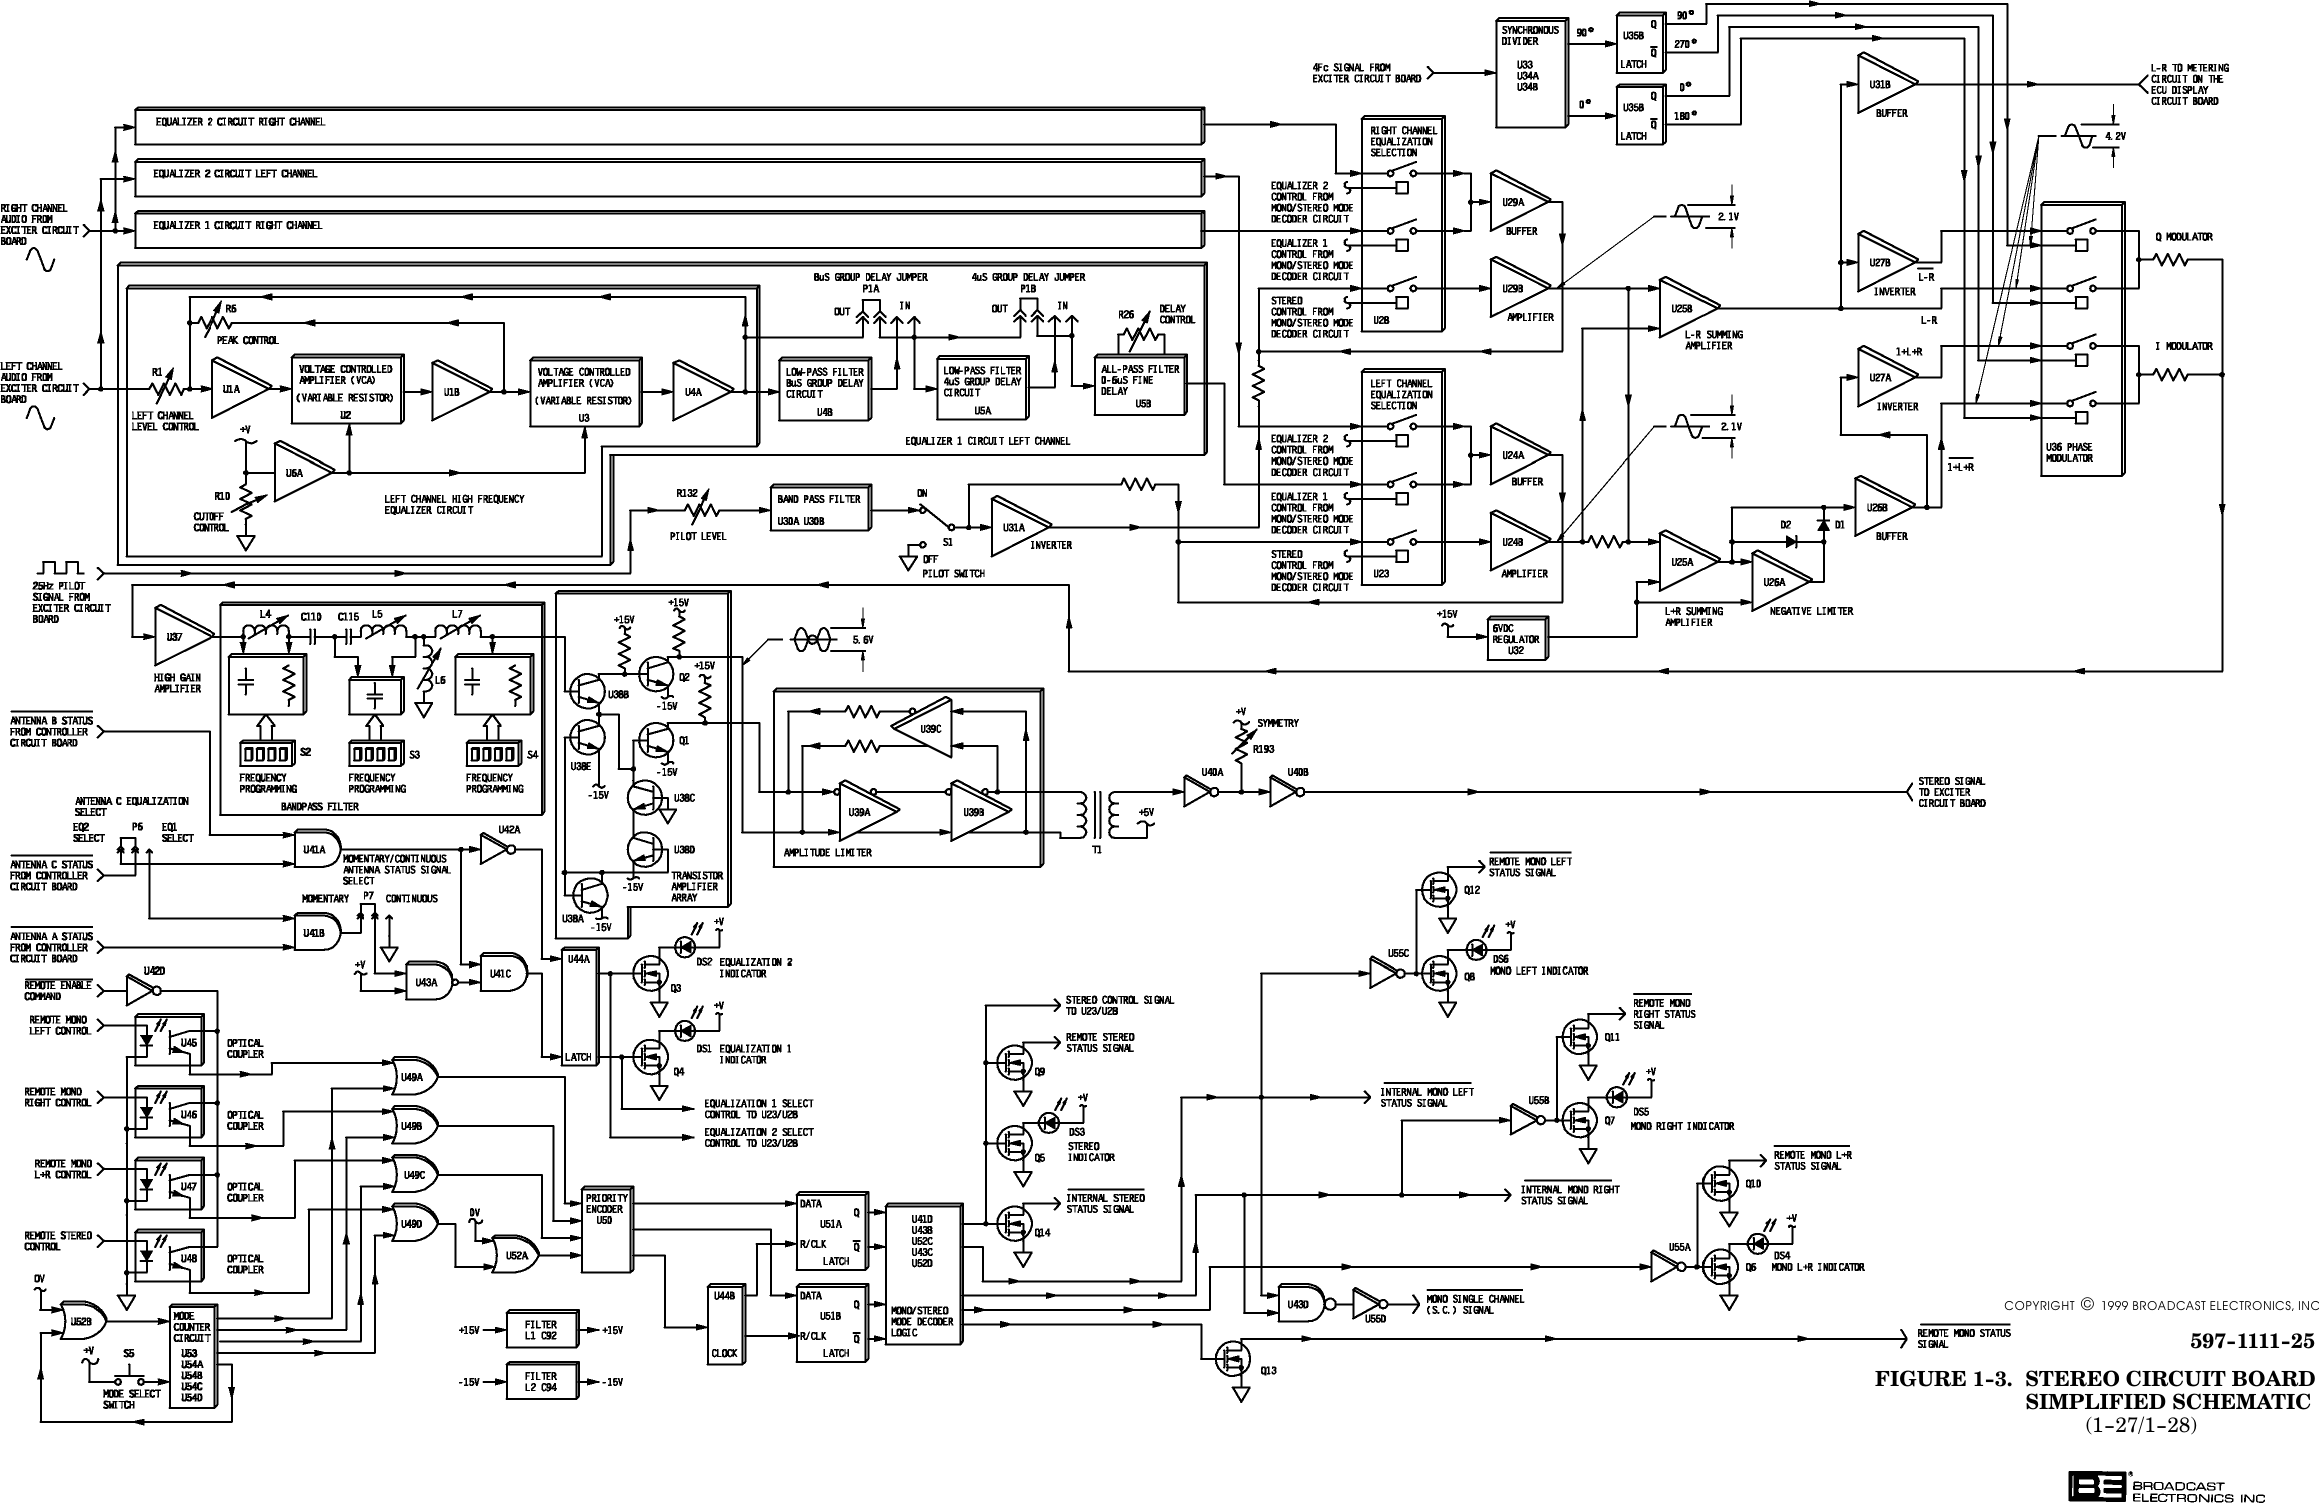 597-1111-25FIGURE 1-3. STEREO CIRCUIT BOARDSIMPLIFIED SCHEMATIC(1-27/1-28)COPYRIGHT  1999 BROADCAST ELECTRONICS, INC